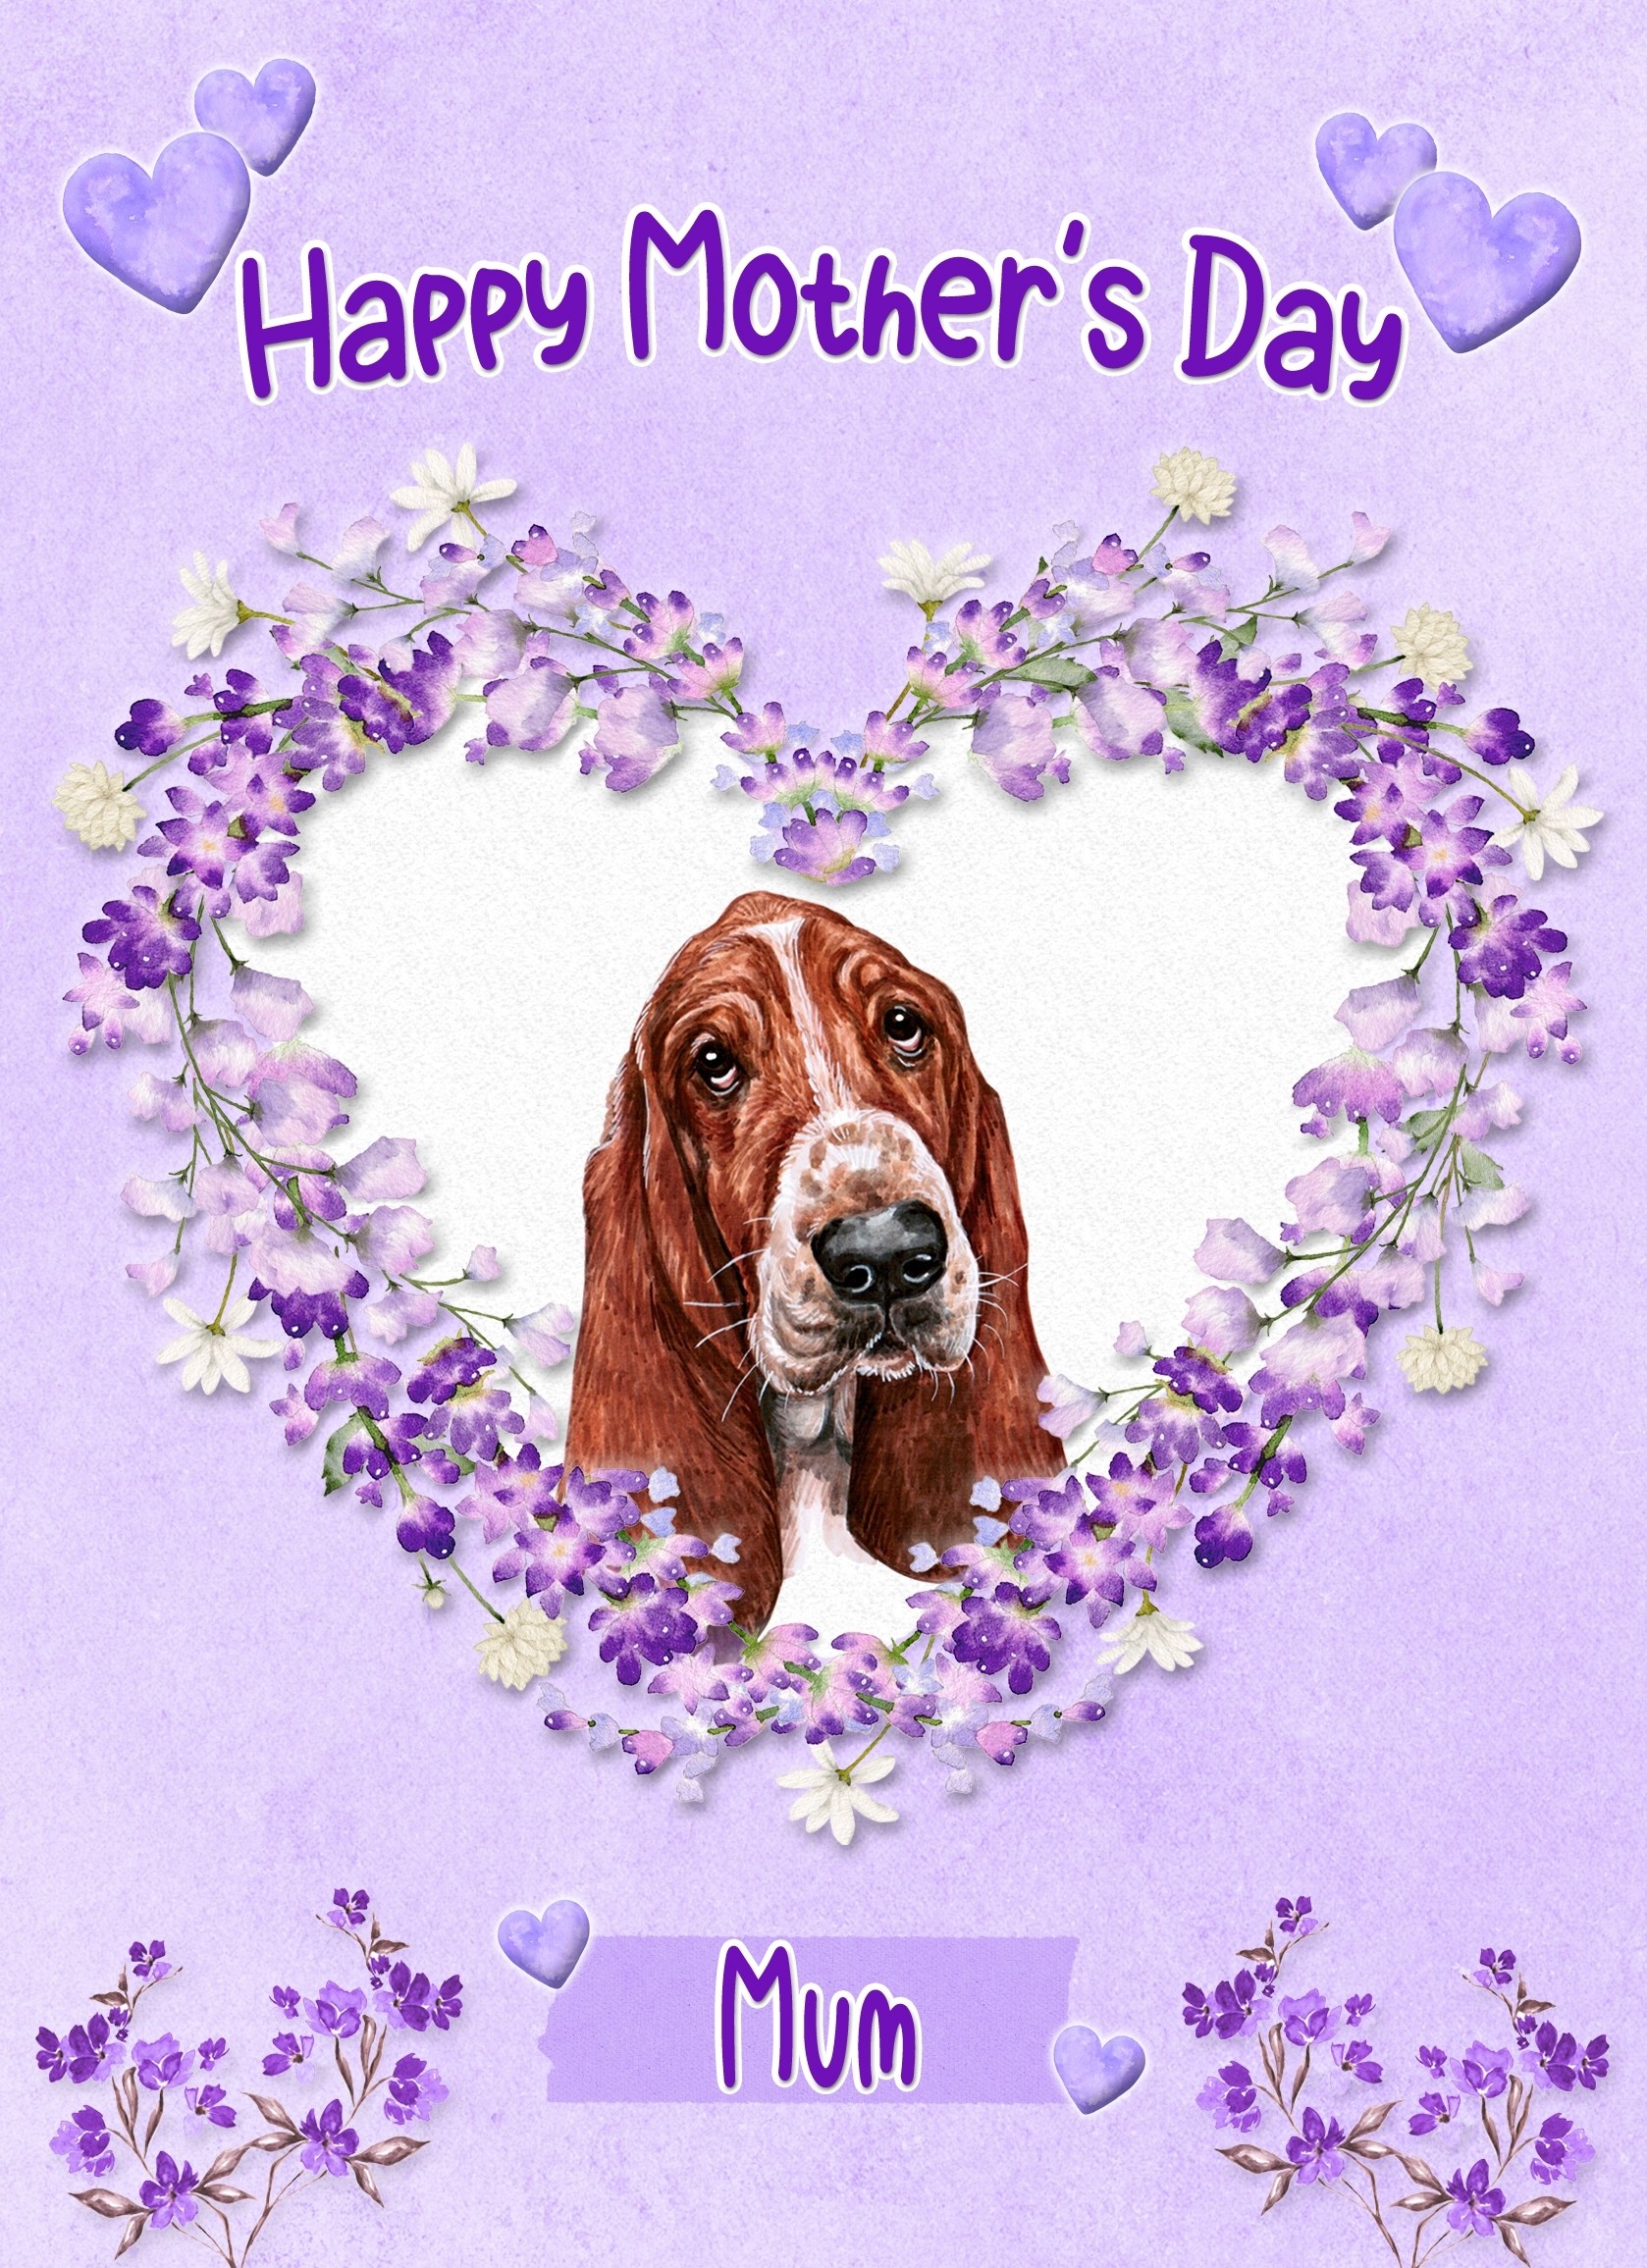 Basset Hound Dog Mothers Day Card (Happy Mothers, Mum)